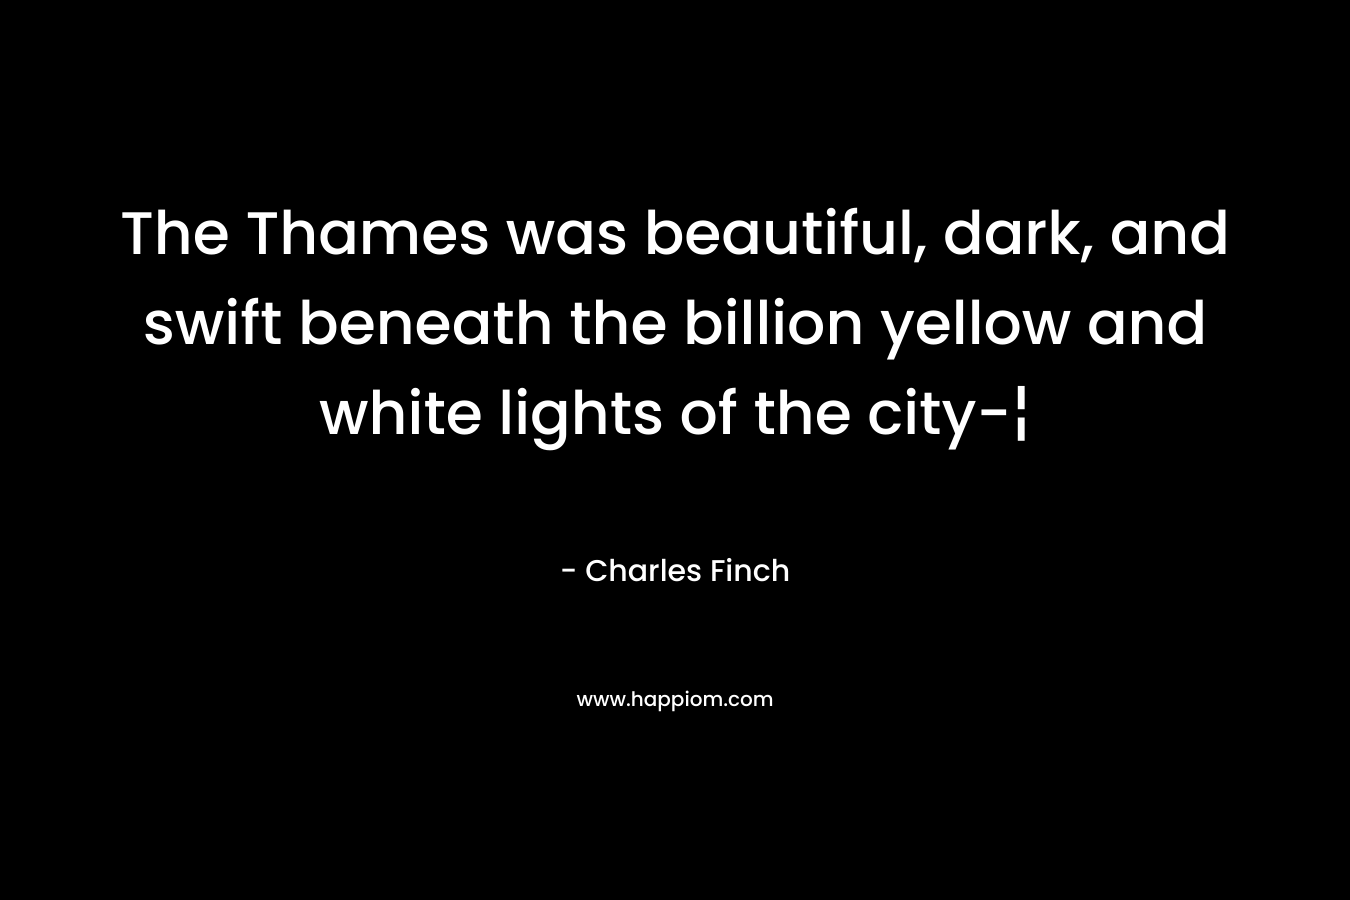 The Thames was beautiful, dark, and swift beneath the billion yellow and white lights of the city-¦